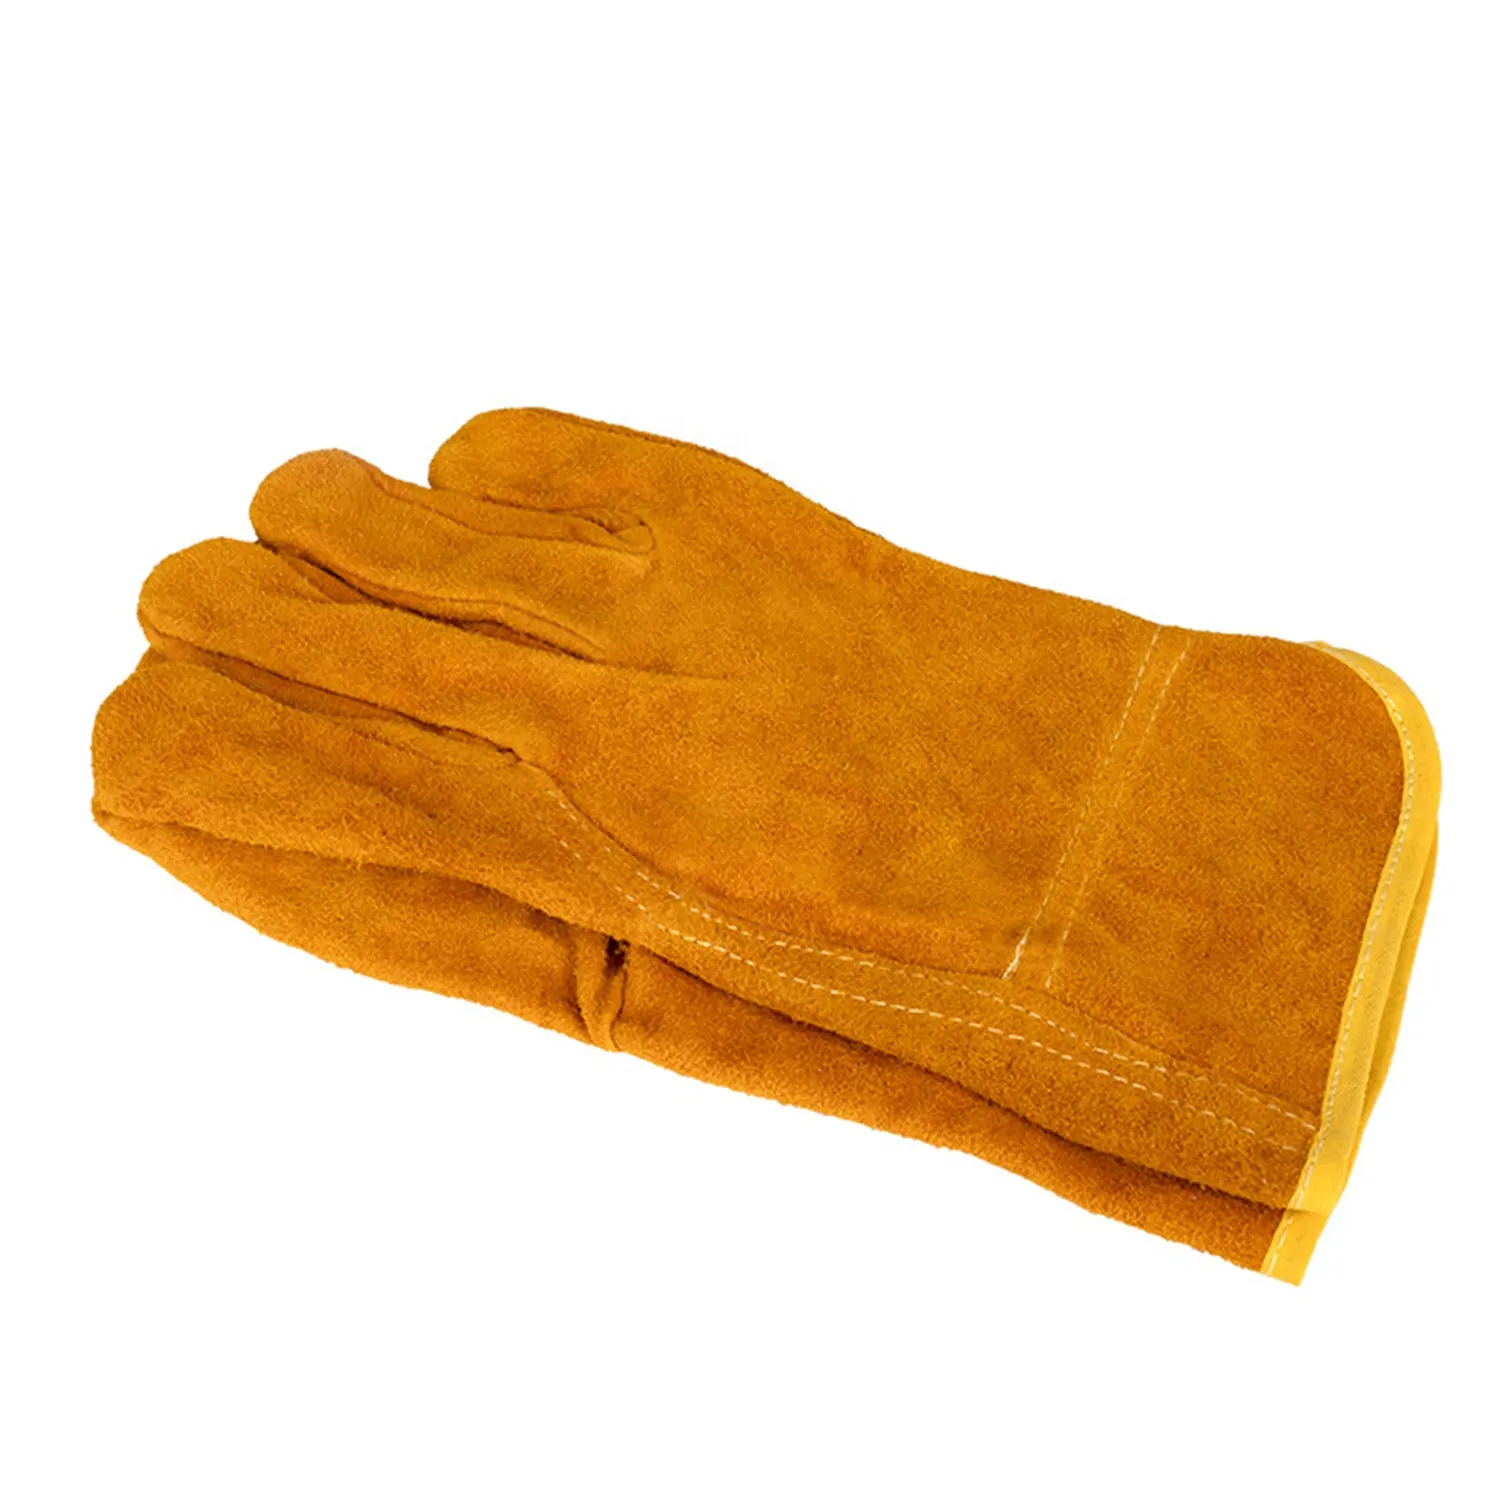 work hand protection safety pink leather cow split red cowhide export grade full glove leather tig welding gloves